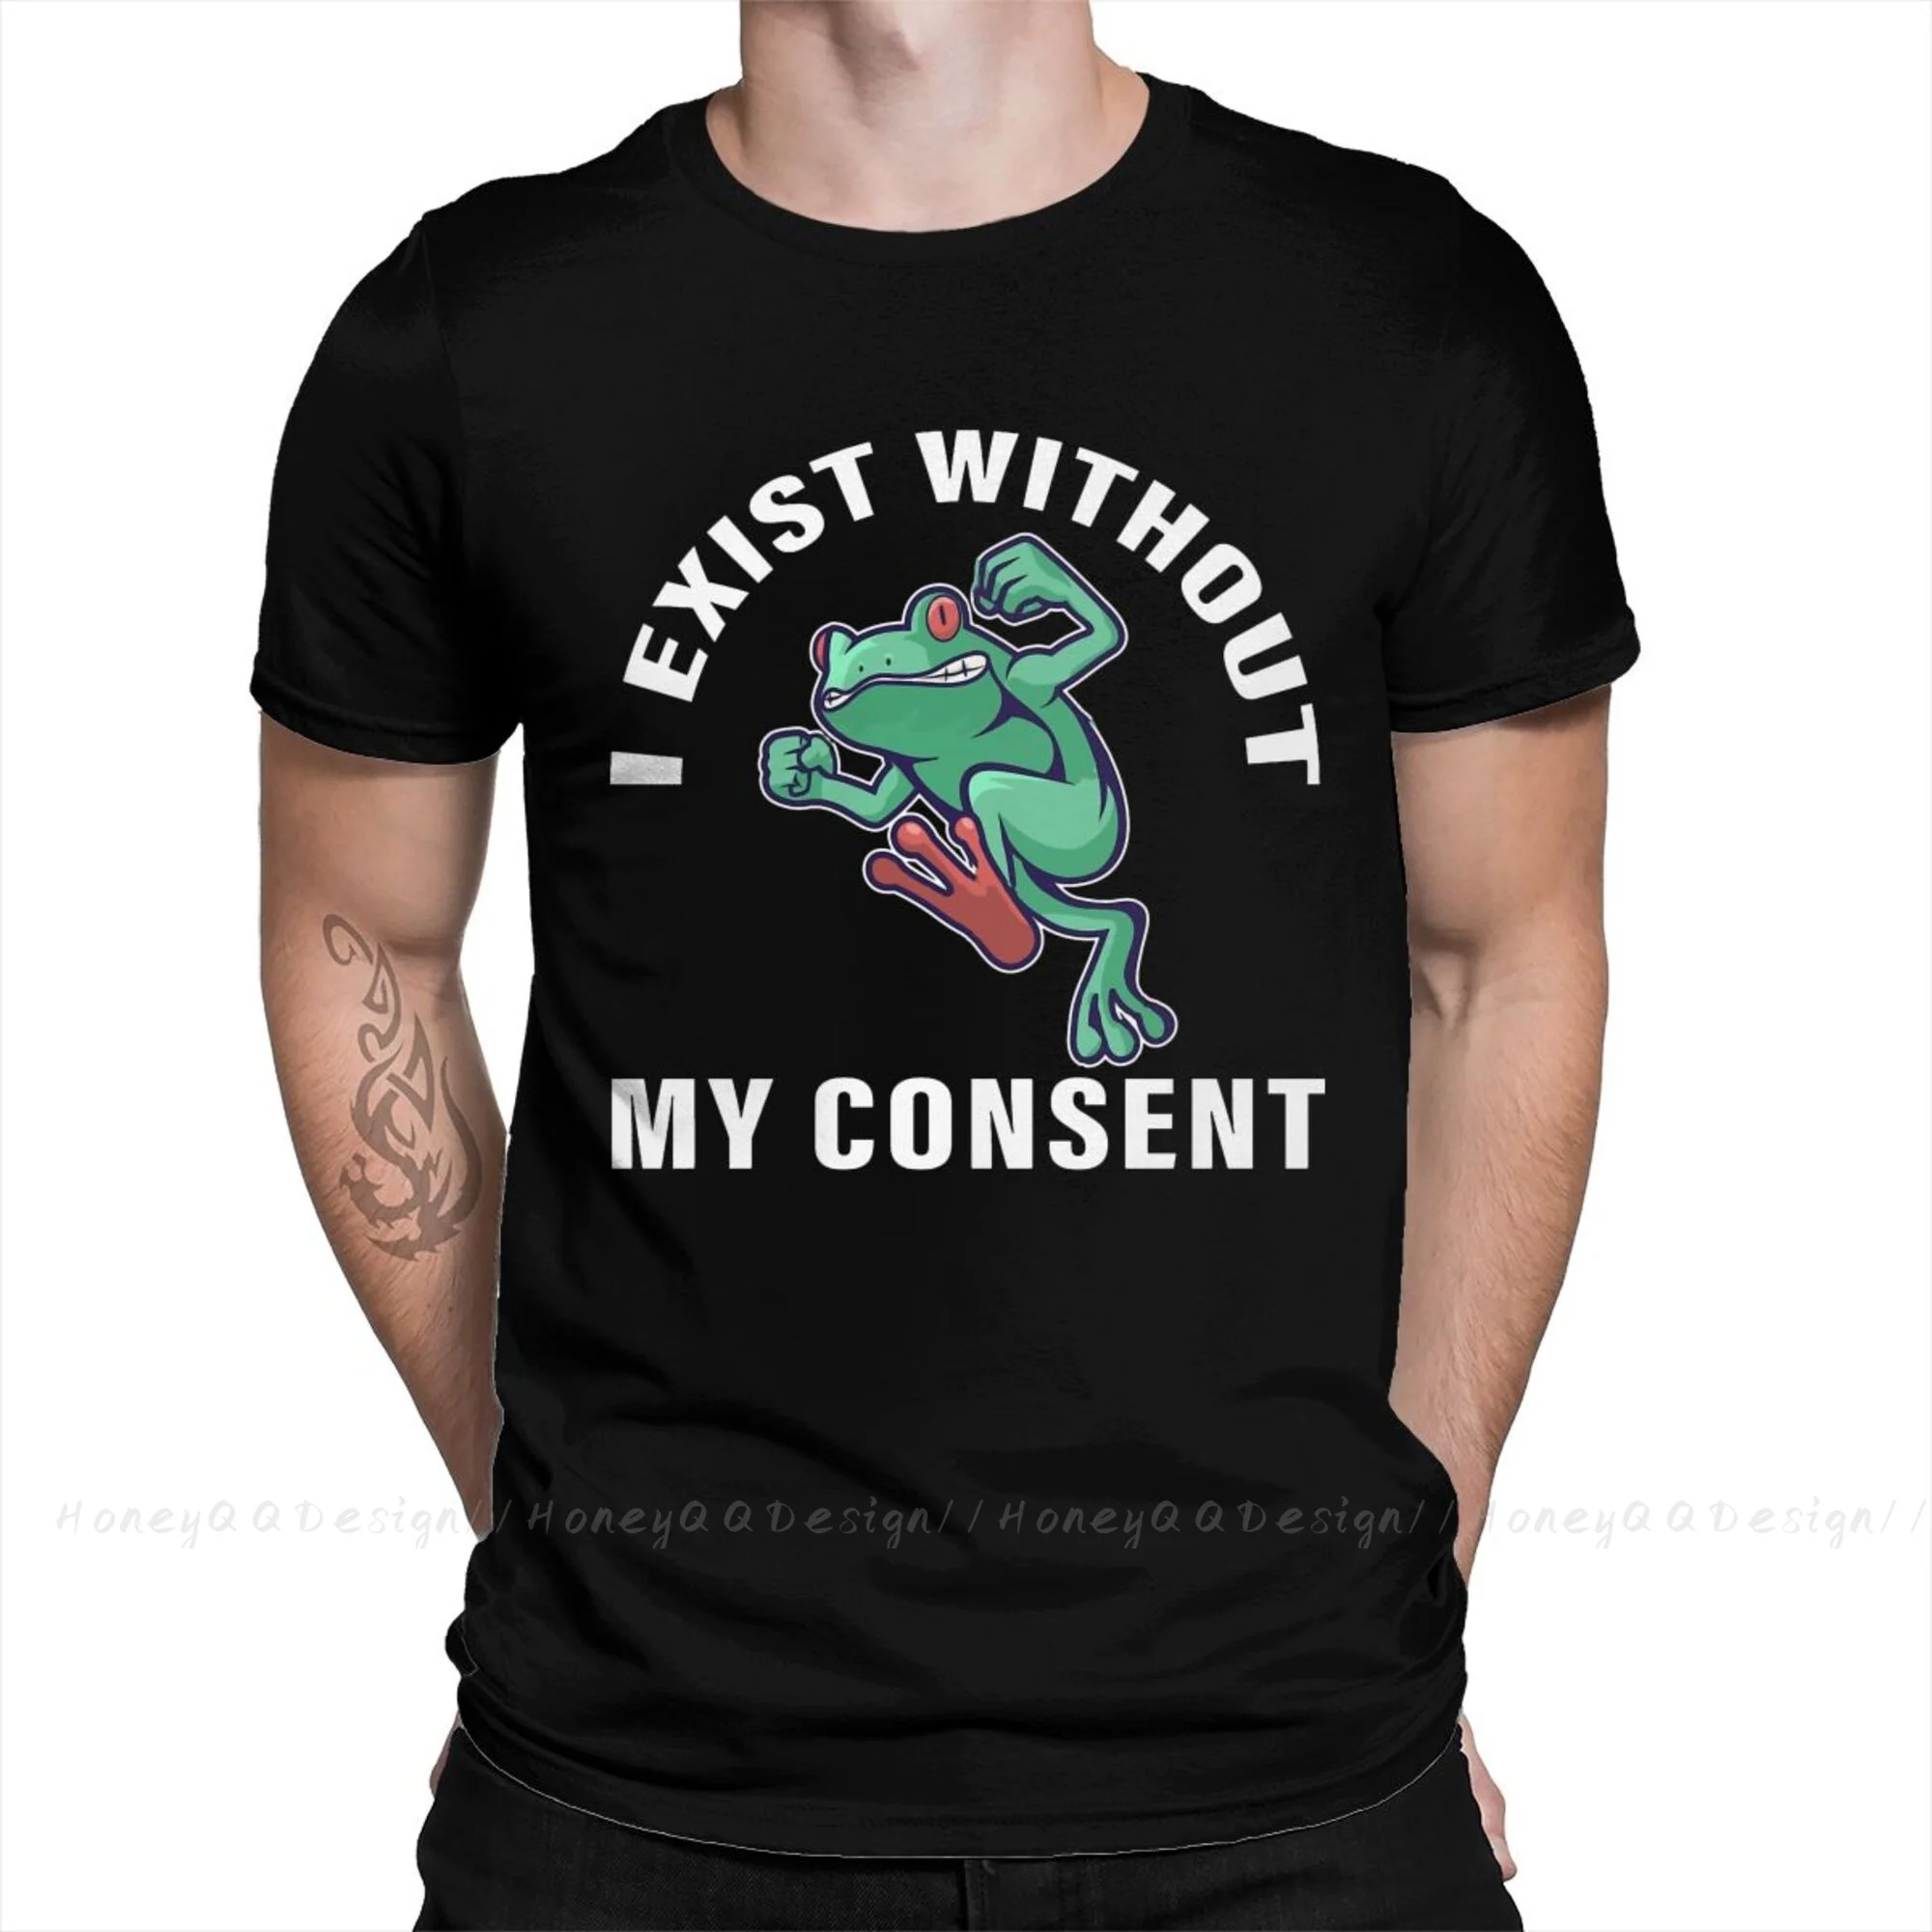 I Exist Without My Consent - Amphibian Dart Frog T-Shirt Men 100% Cotton Short Summer Sleeve Casual Plus Size Shirt Adults